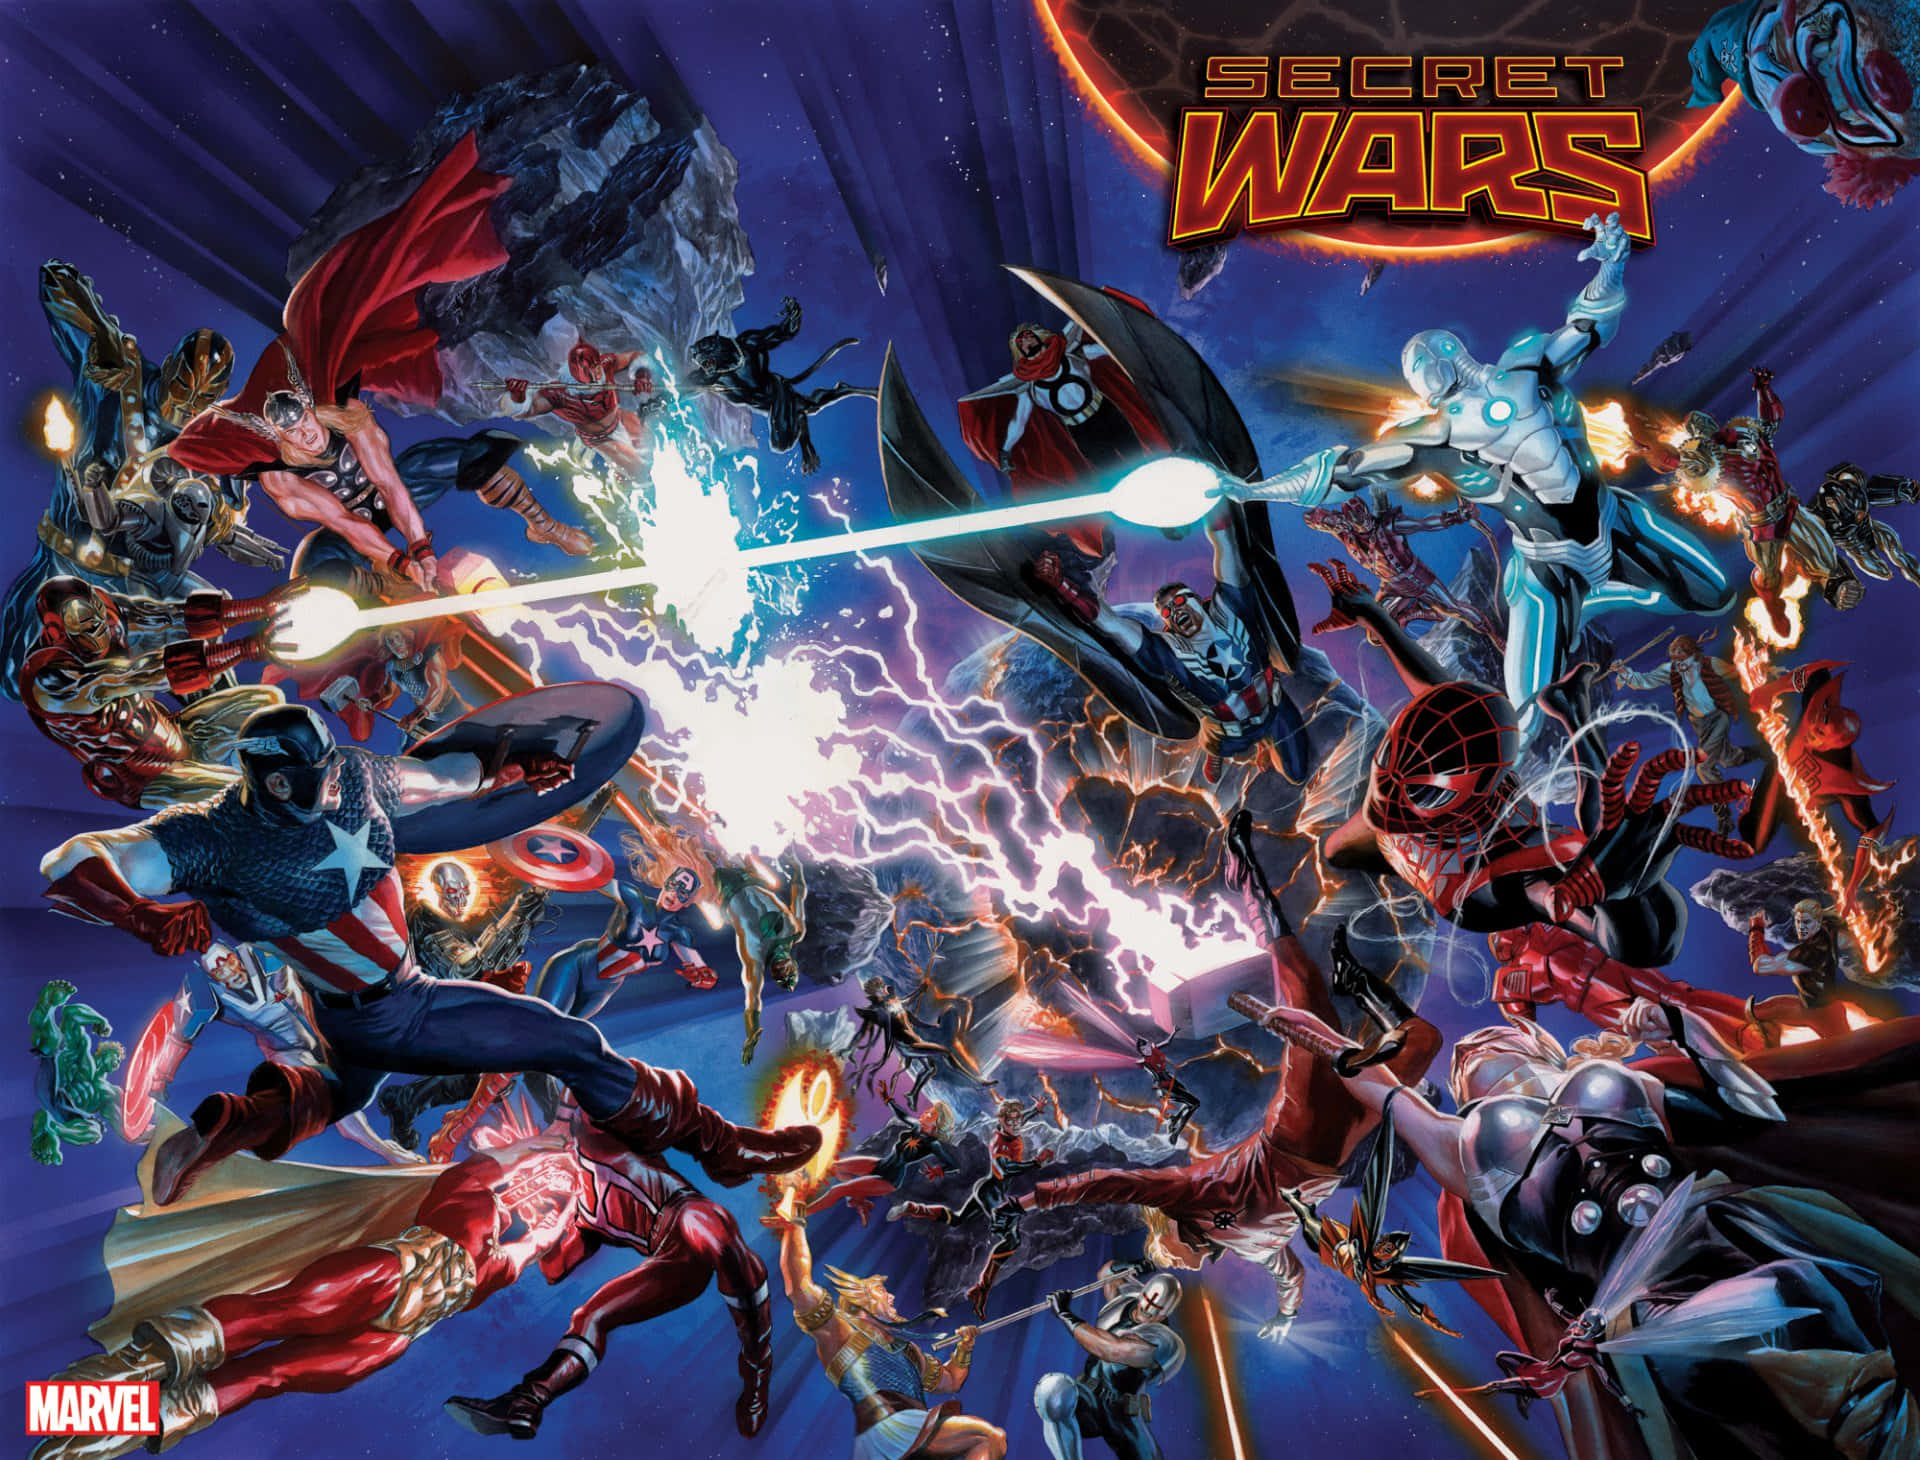 Exciting Collision of Heroes - Secret Wars Comic Universe Wallpaper